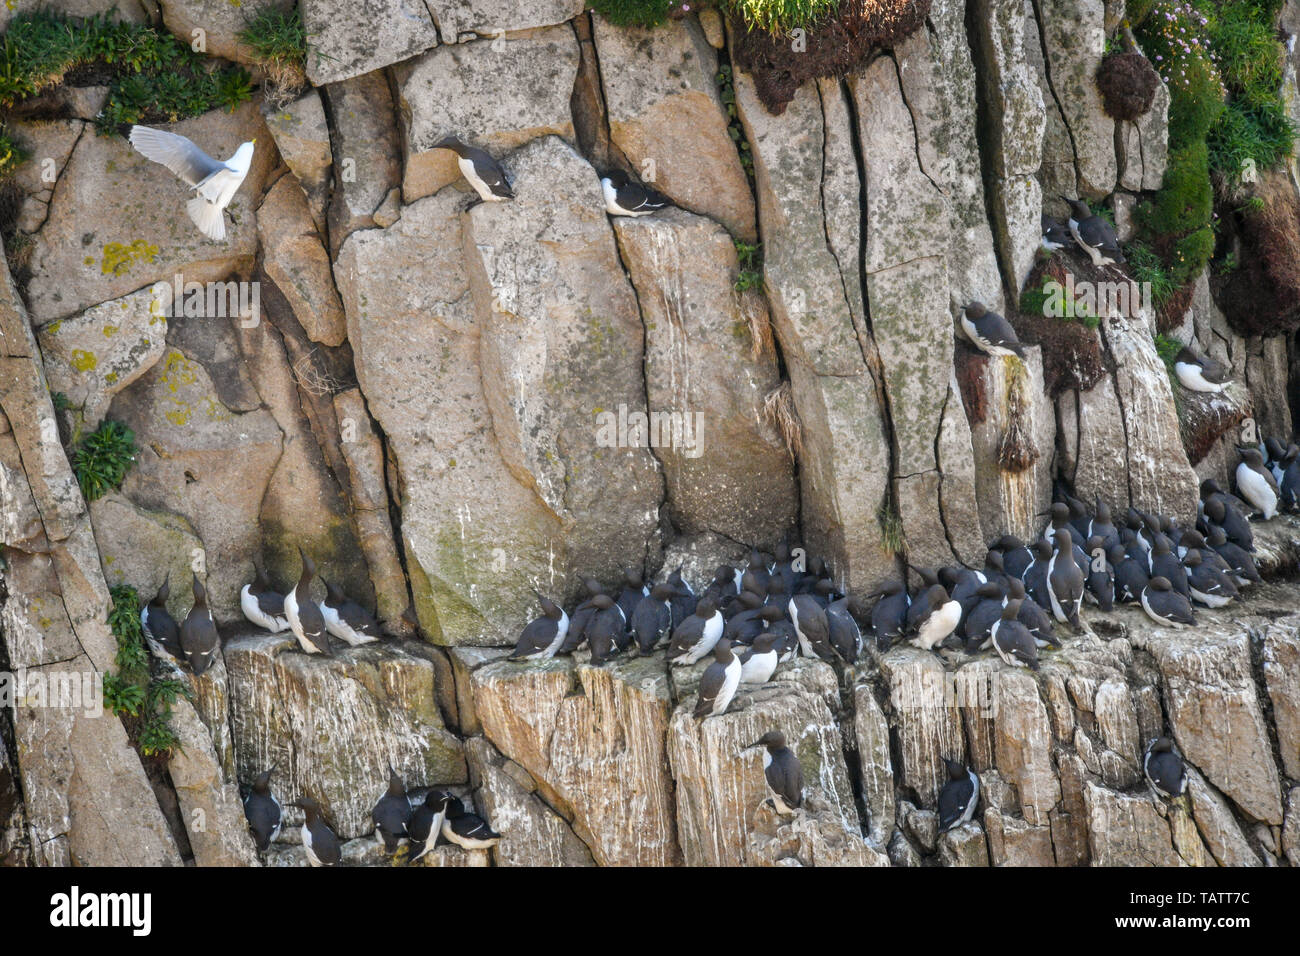 Guillemots nest on cliff edges on Lundy island in the Bristol Channel, off the coast of Devon, where a study led by the RSPB has revealed that total seabird numbers on the island have tripled in the past 15 years to over 21,000 birds. Stock Photo